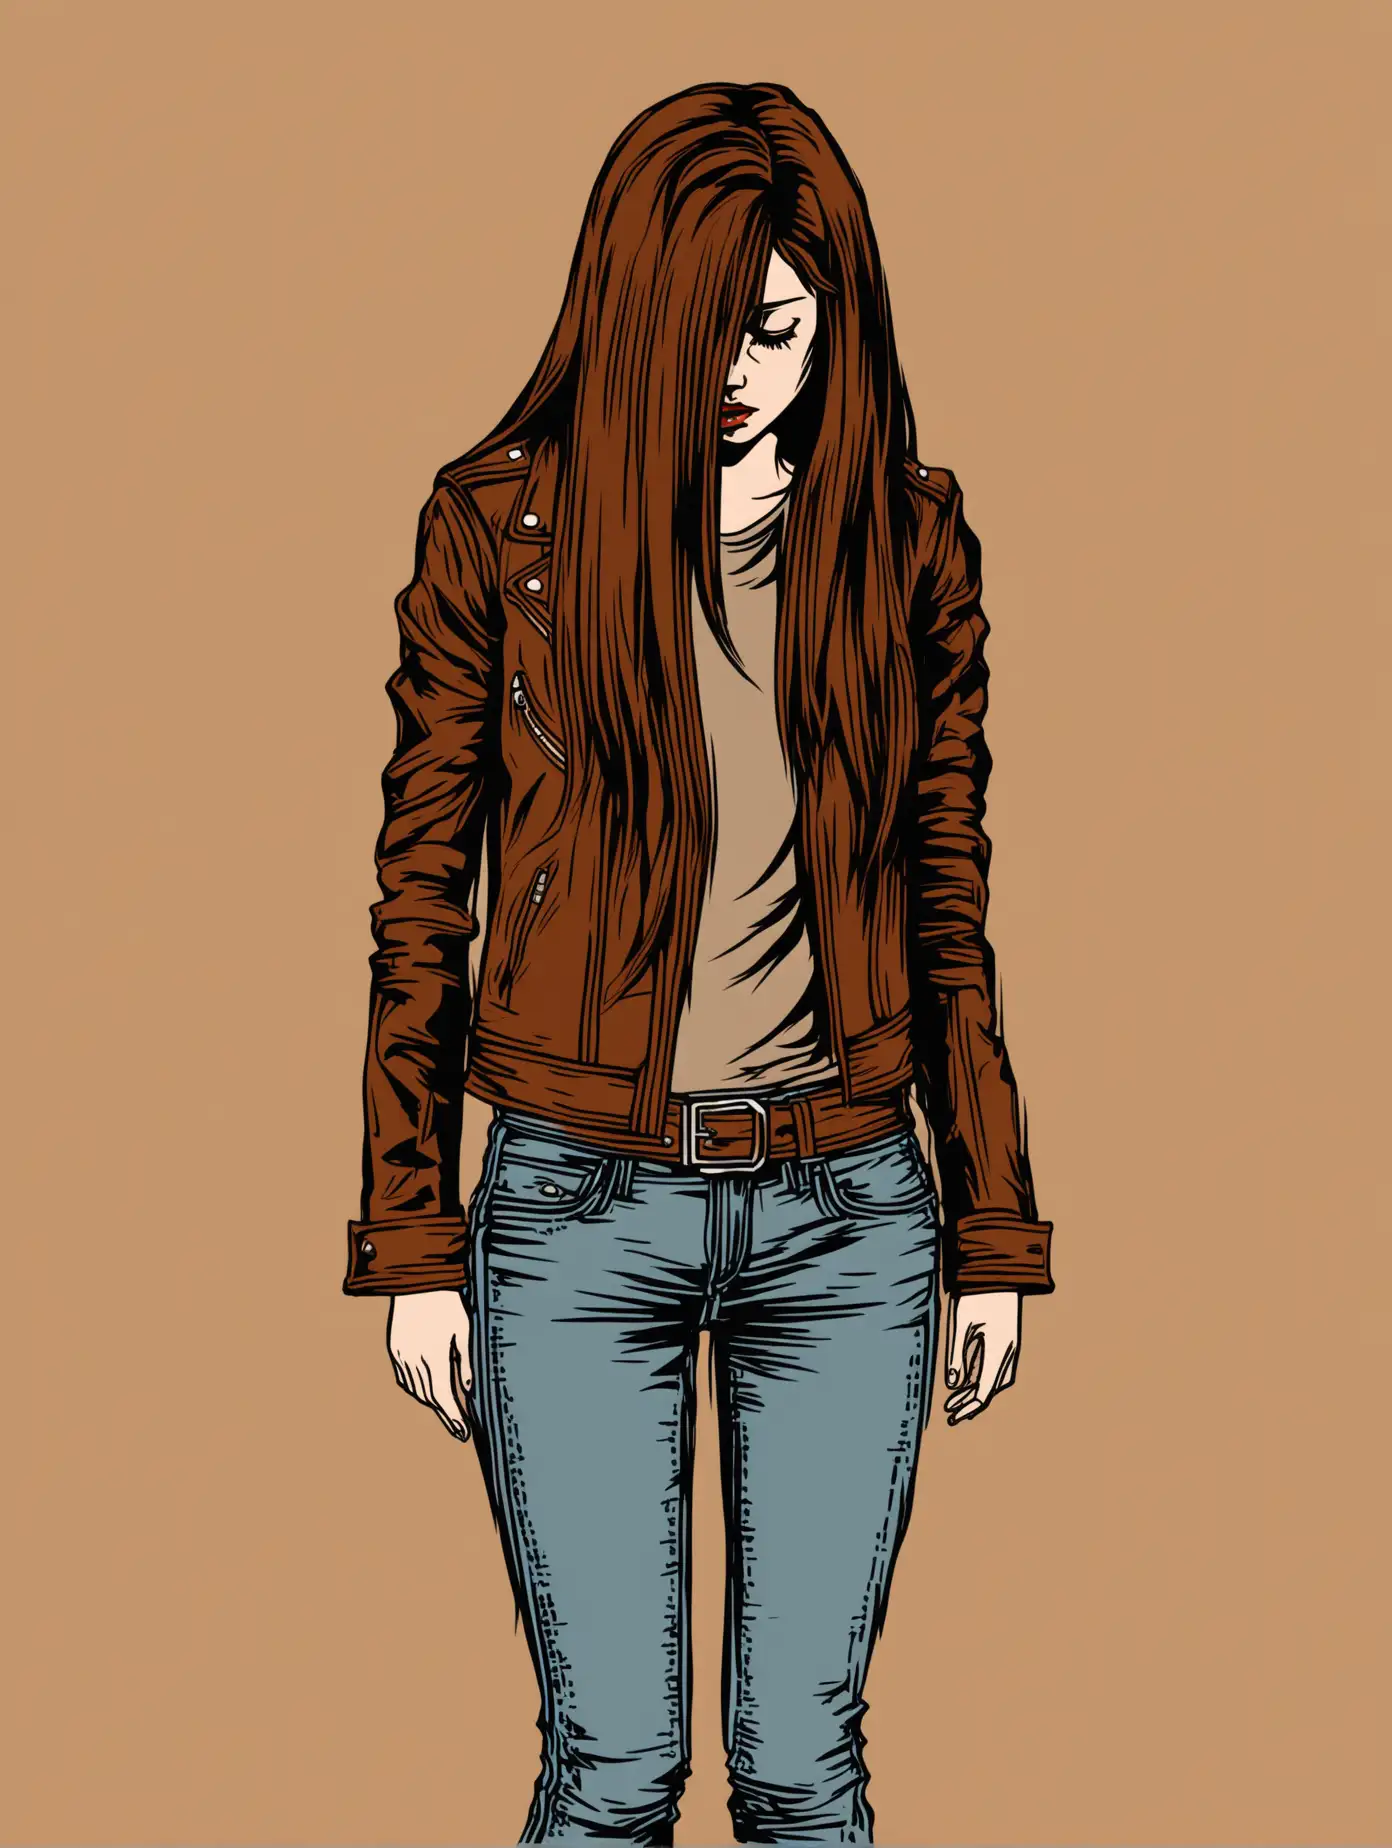 Vector drawing of a standing girl, in her 20s standing wearing a brown leather jacket and jeans her head is looking down and her long devilish hair hides her face